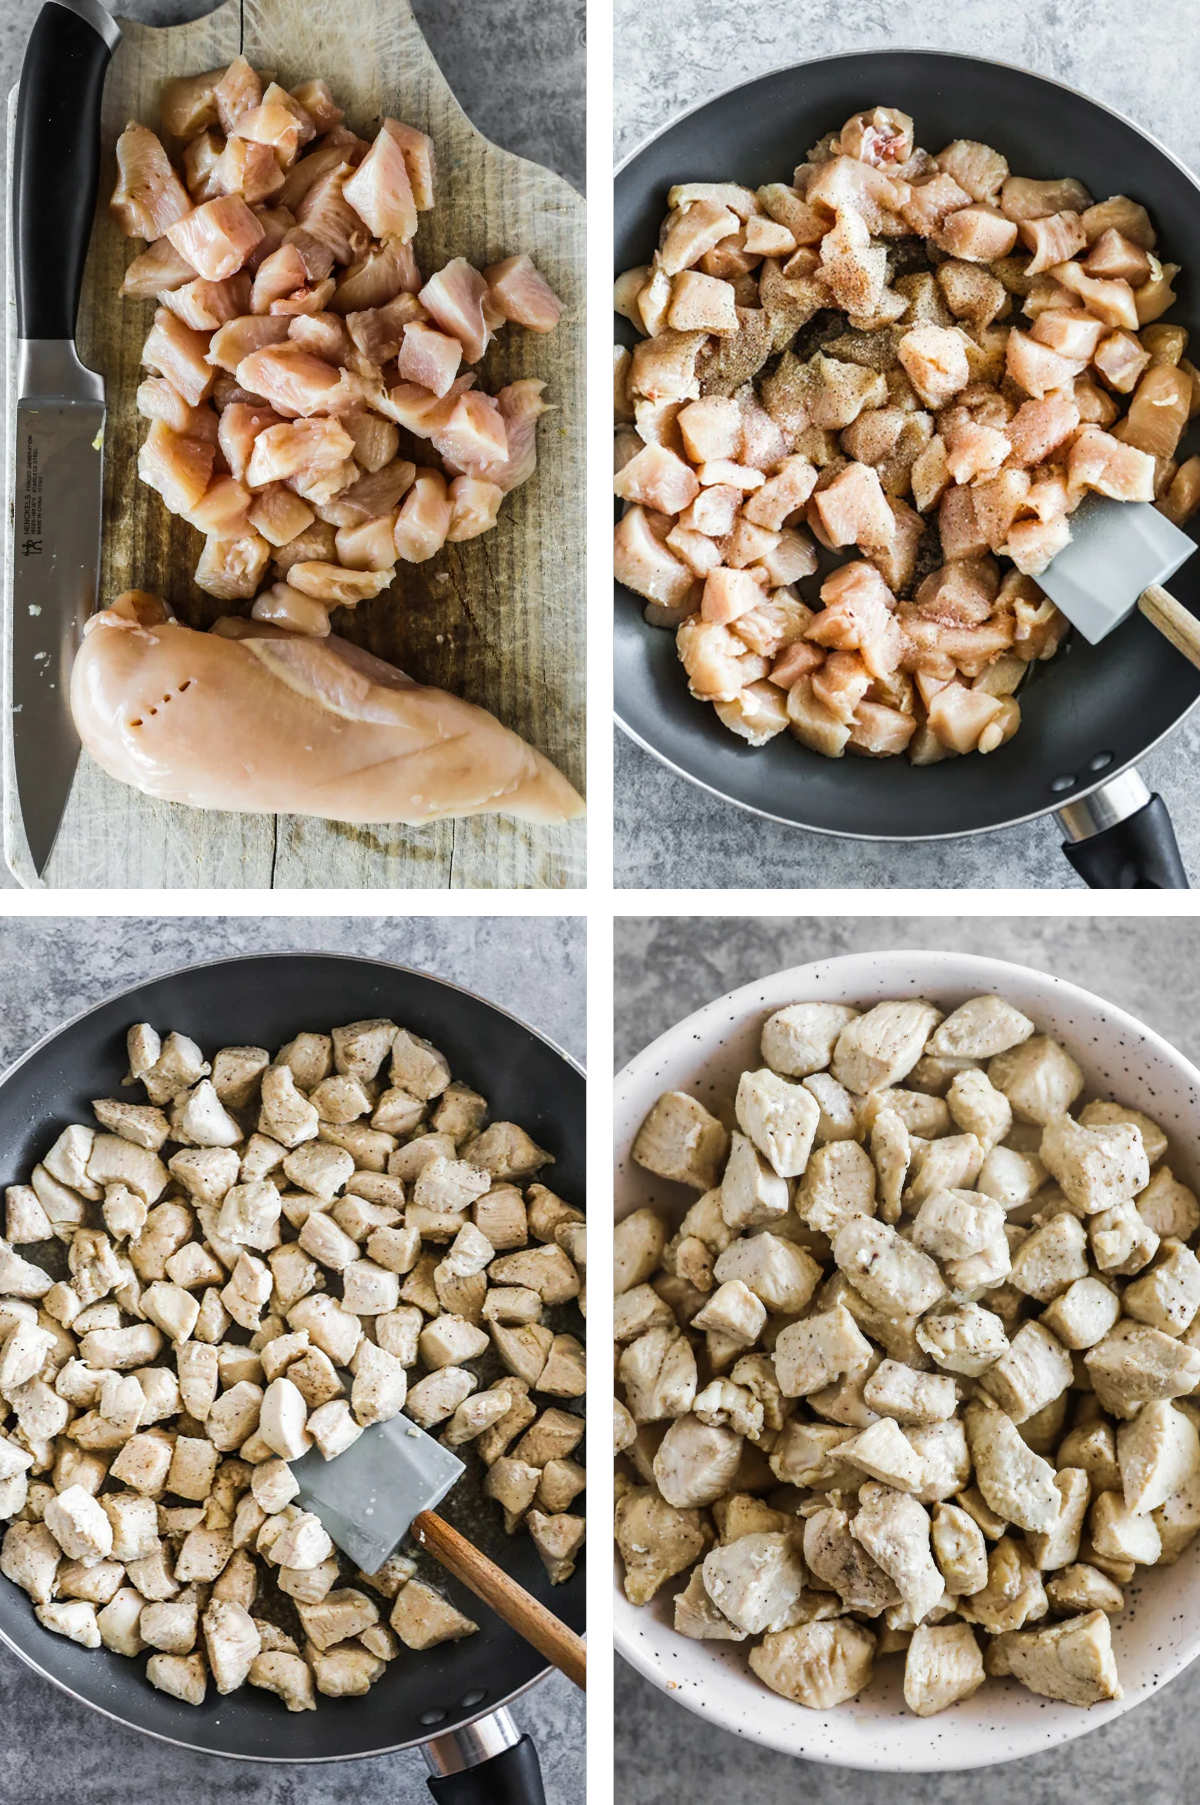 Four images in one. 1. Cubed chicken on cutting board. 2. cubed chicken in frying pan with seasonings. 3. cubed chicken cooked in frying pan. 4. cubed chicken in bow. 